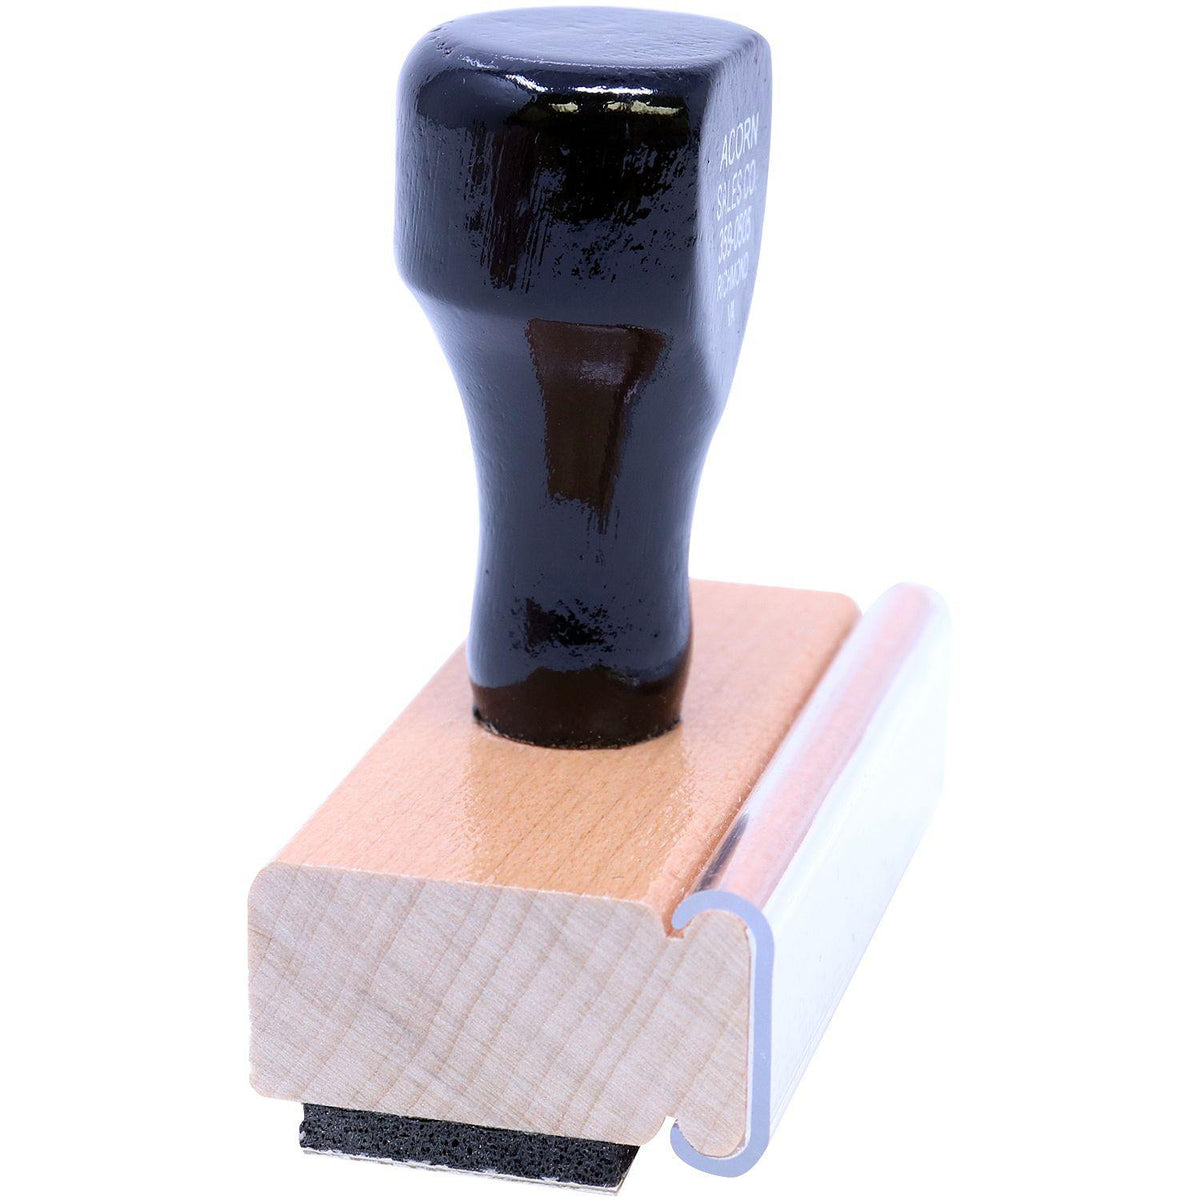 Side View of Large Renewed Rubber Stamp at an Angle